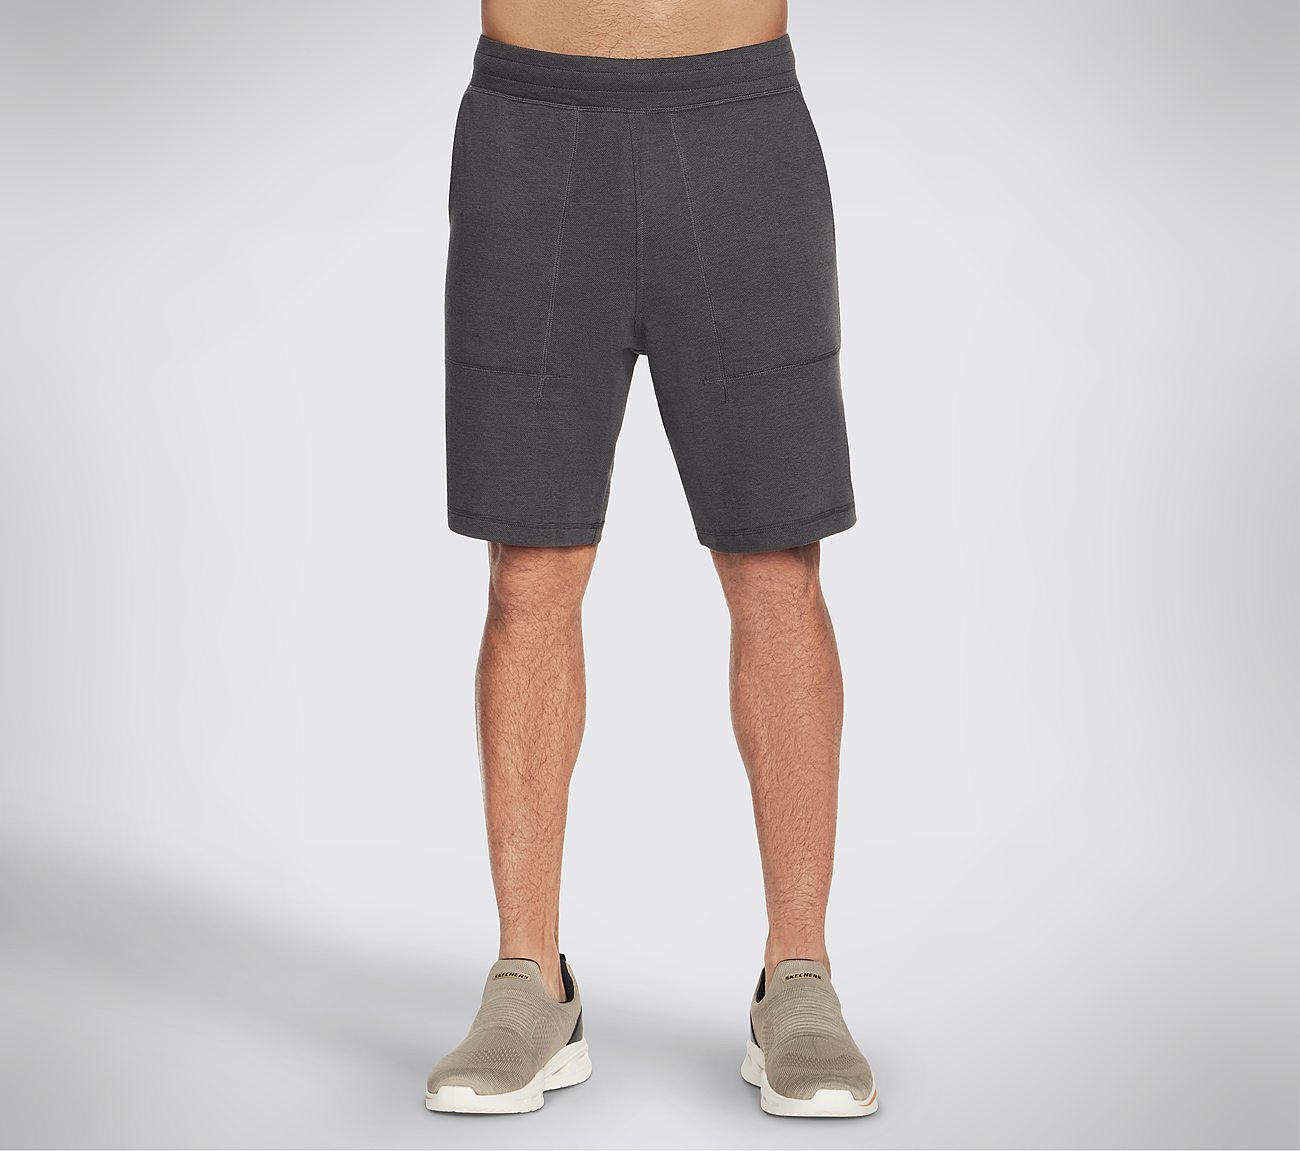 Compression Liner Shorts 🏃 – Tagged S– Bermies